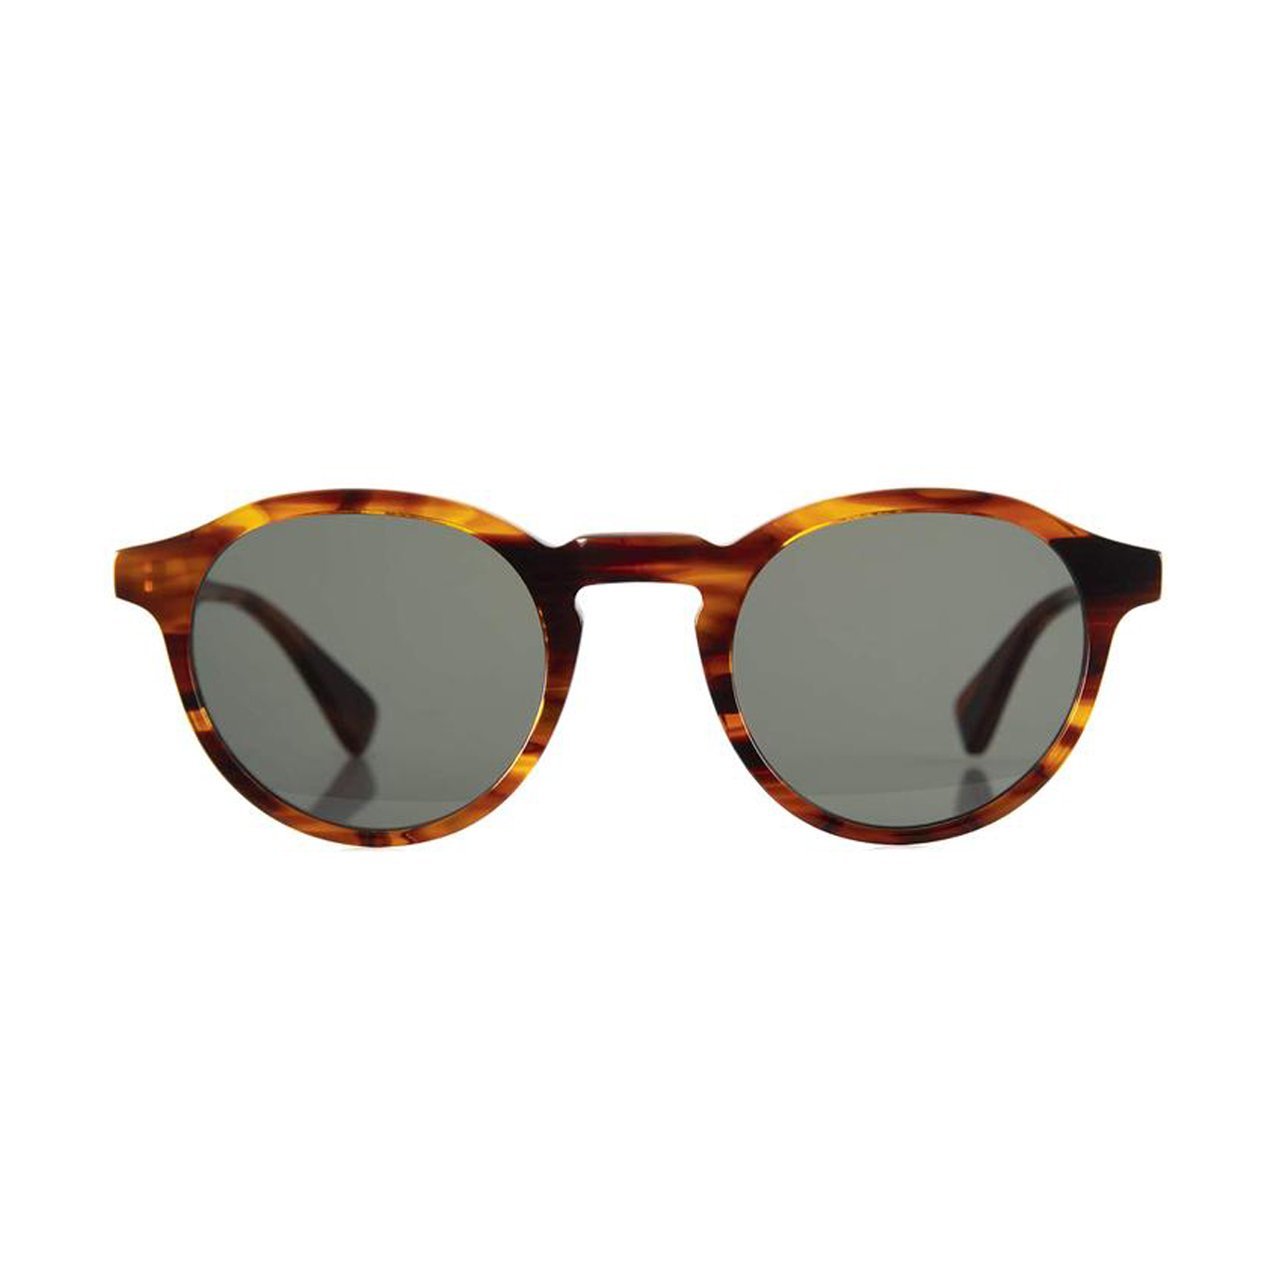 Curry and Paxton - Alex Sunglasses in Caramel | Classic Driver Market